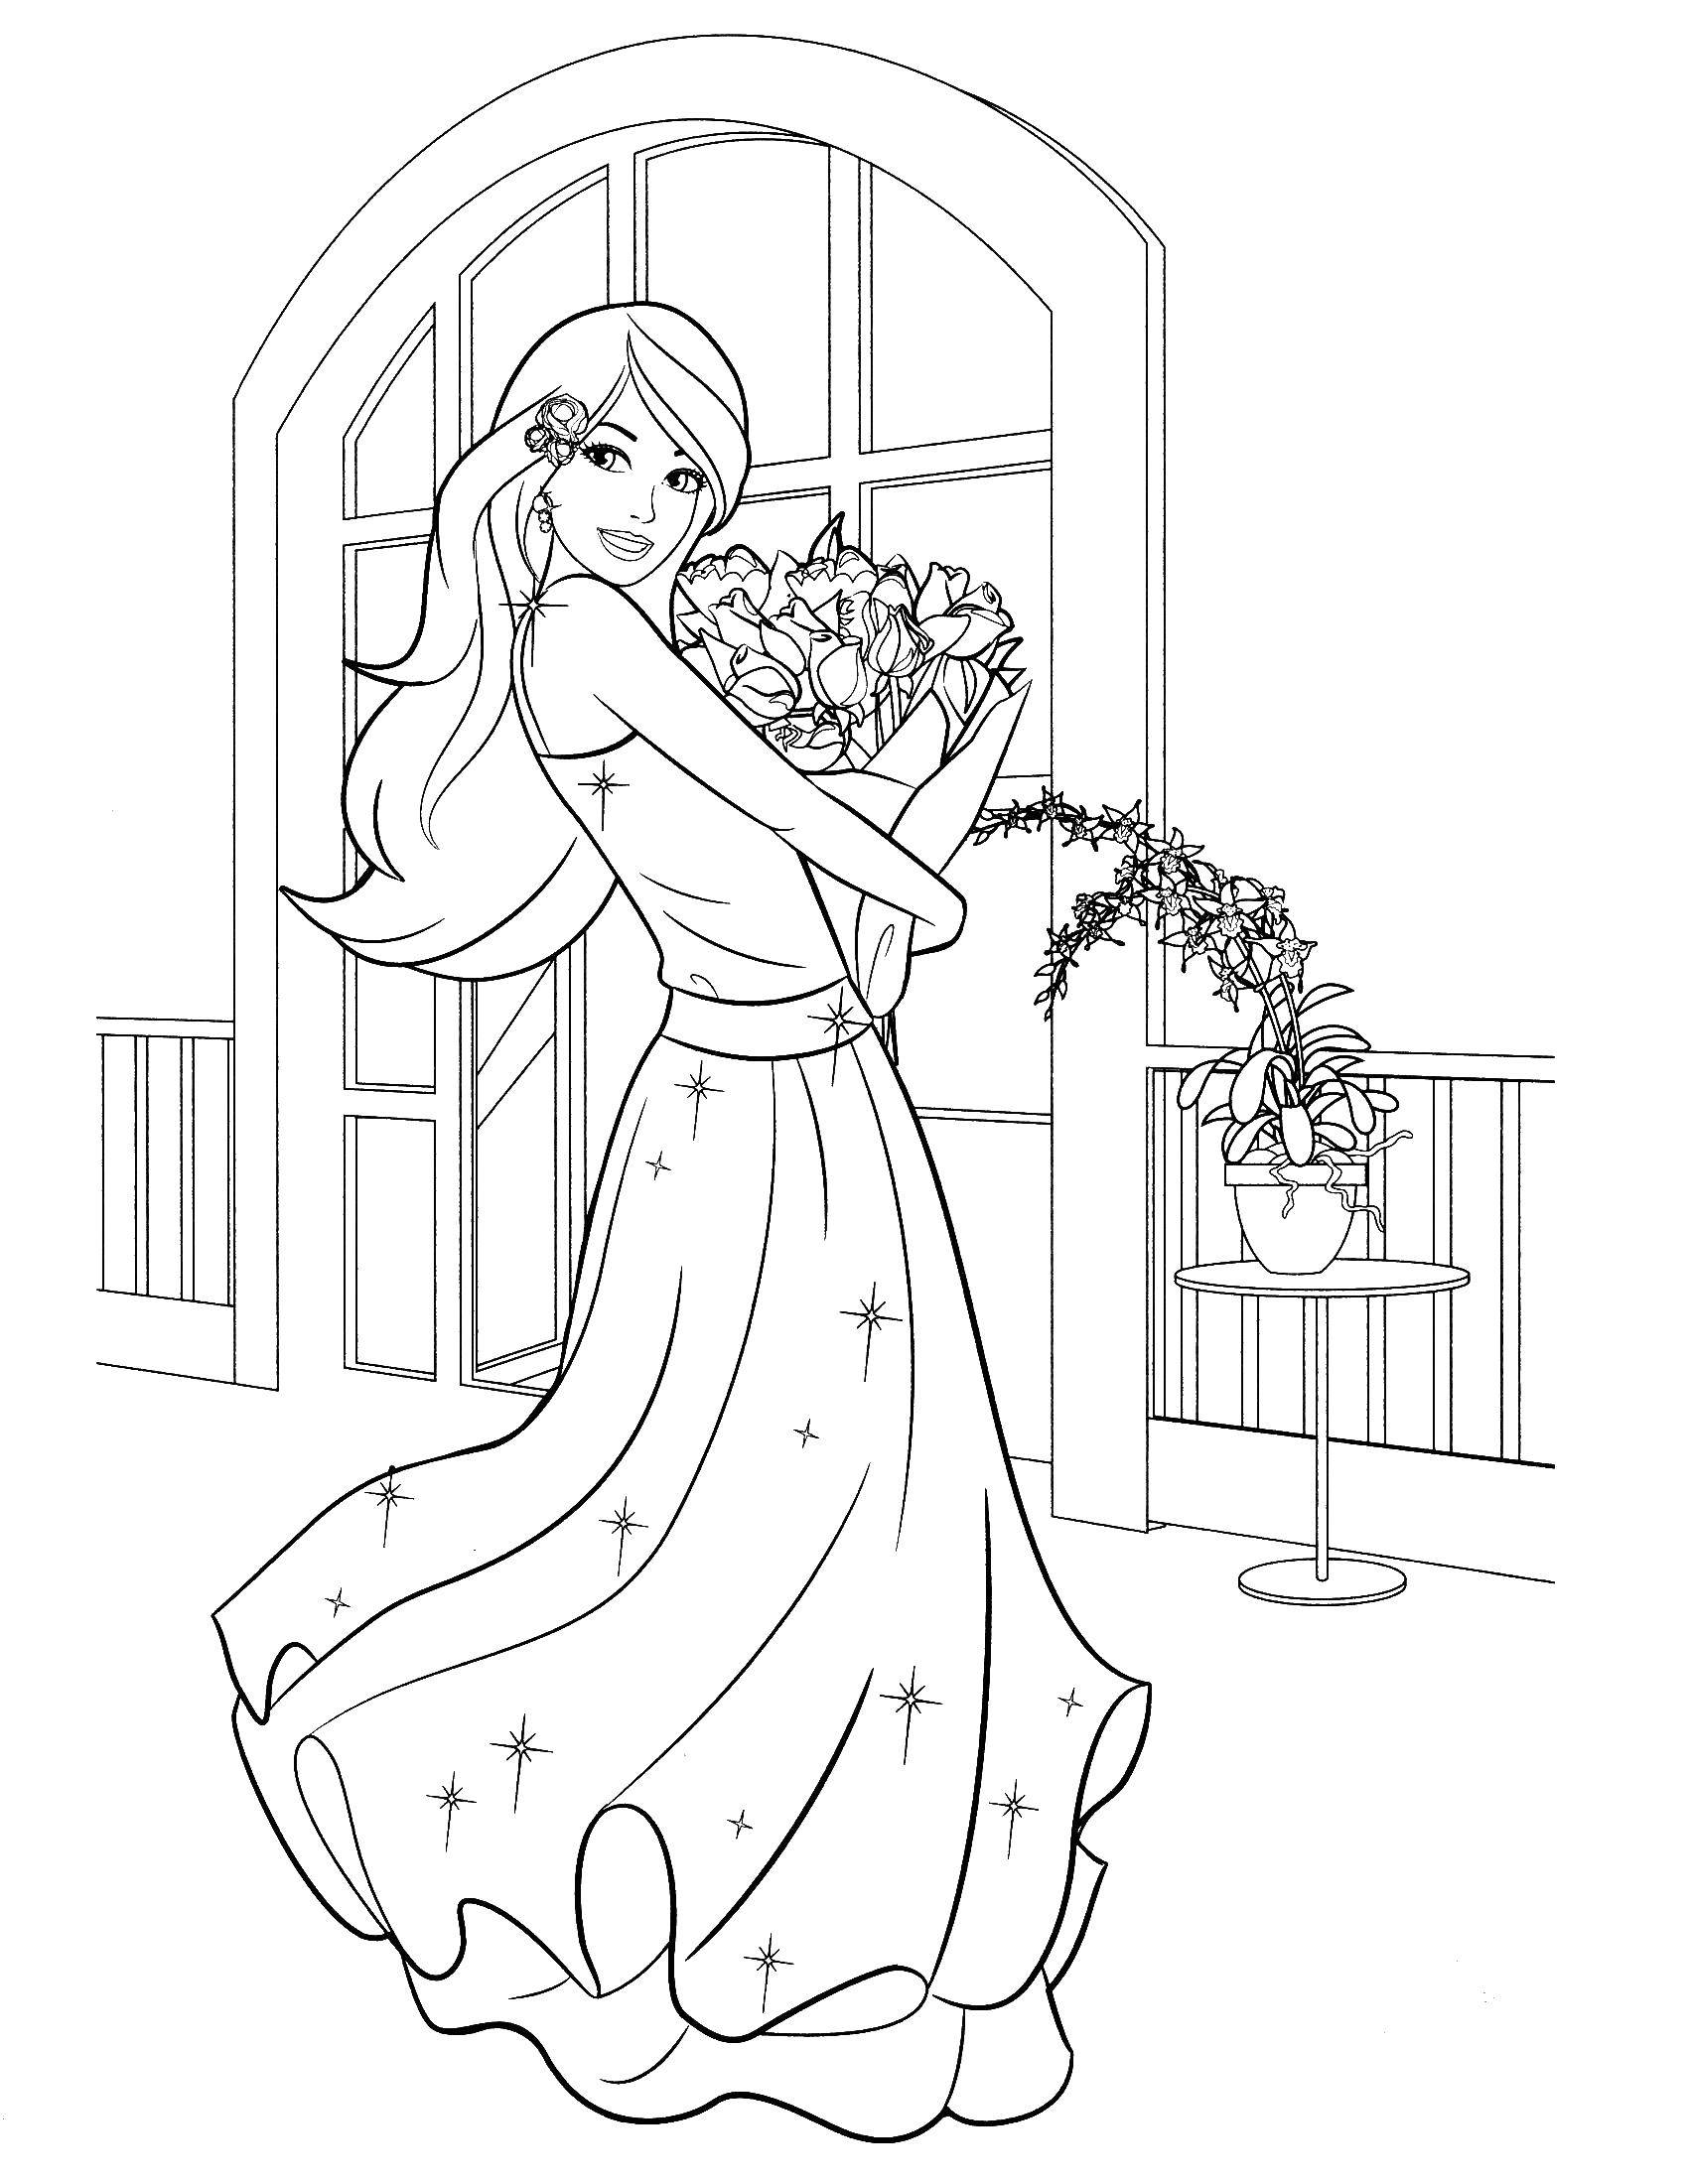 Coloring Barbie with flowers. Category Barbie . Tags:  Barbie , flowers.